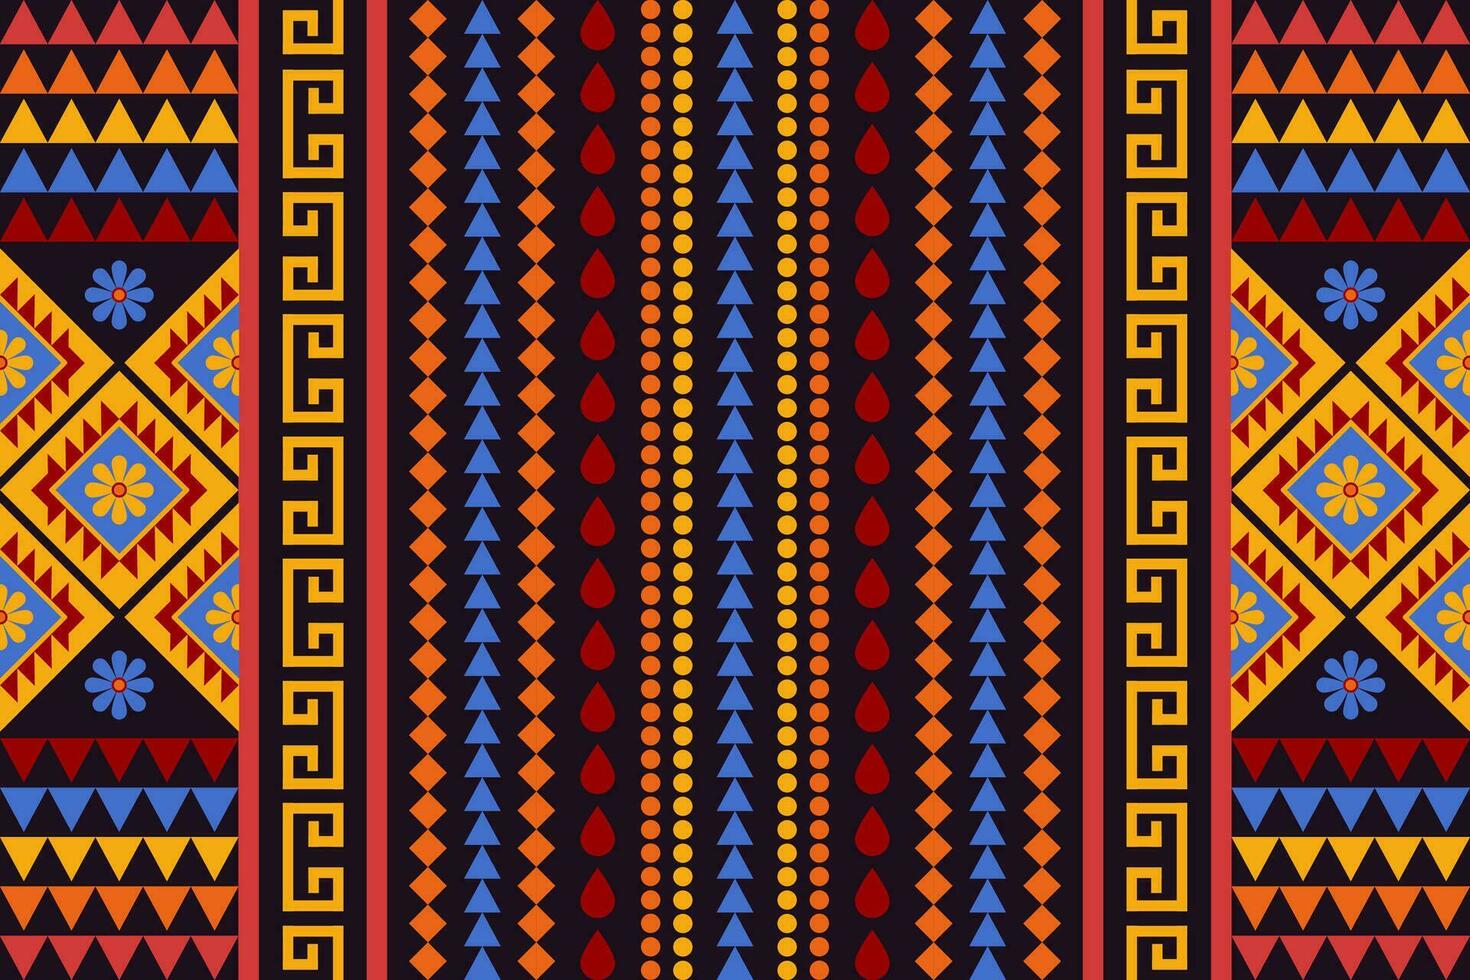 Geometric ethnic pattern traditional Design for background, carpet, wallpaper, clothing, wrapping, Batik, fabric, Vector illustration embroidery style. Tribal pattern